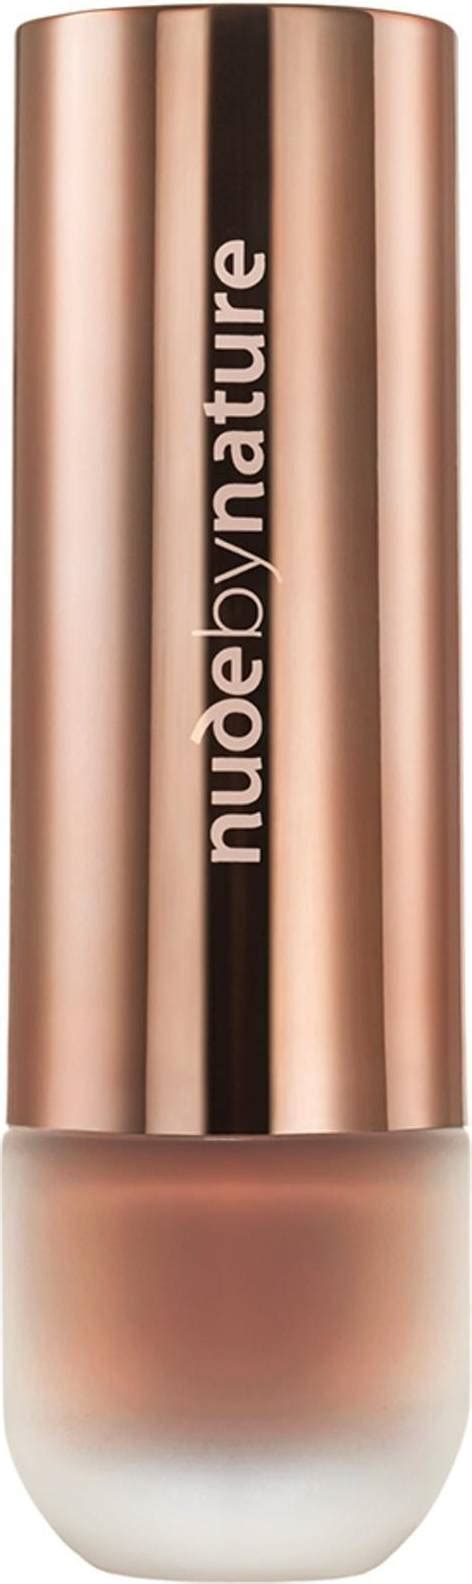 Nude By Nature Flawless Liquid Foundation C8 Chocolate Pris